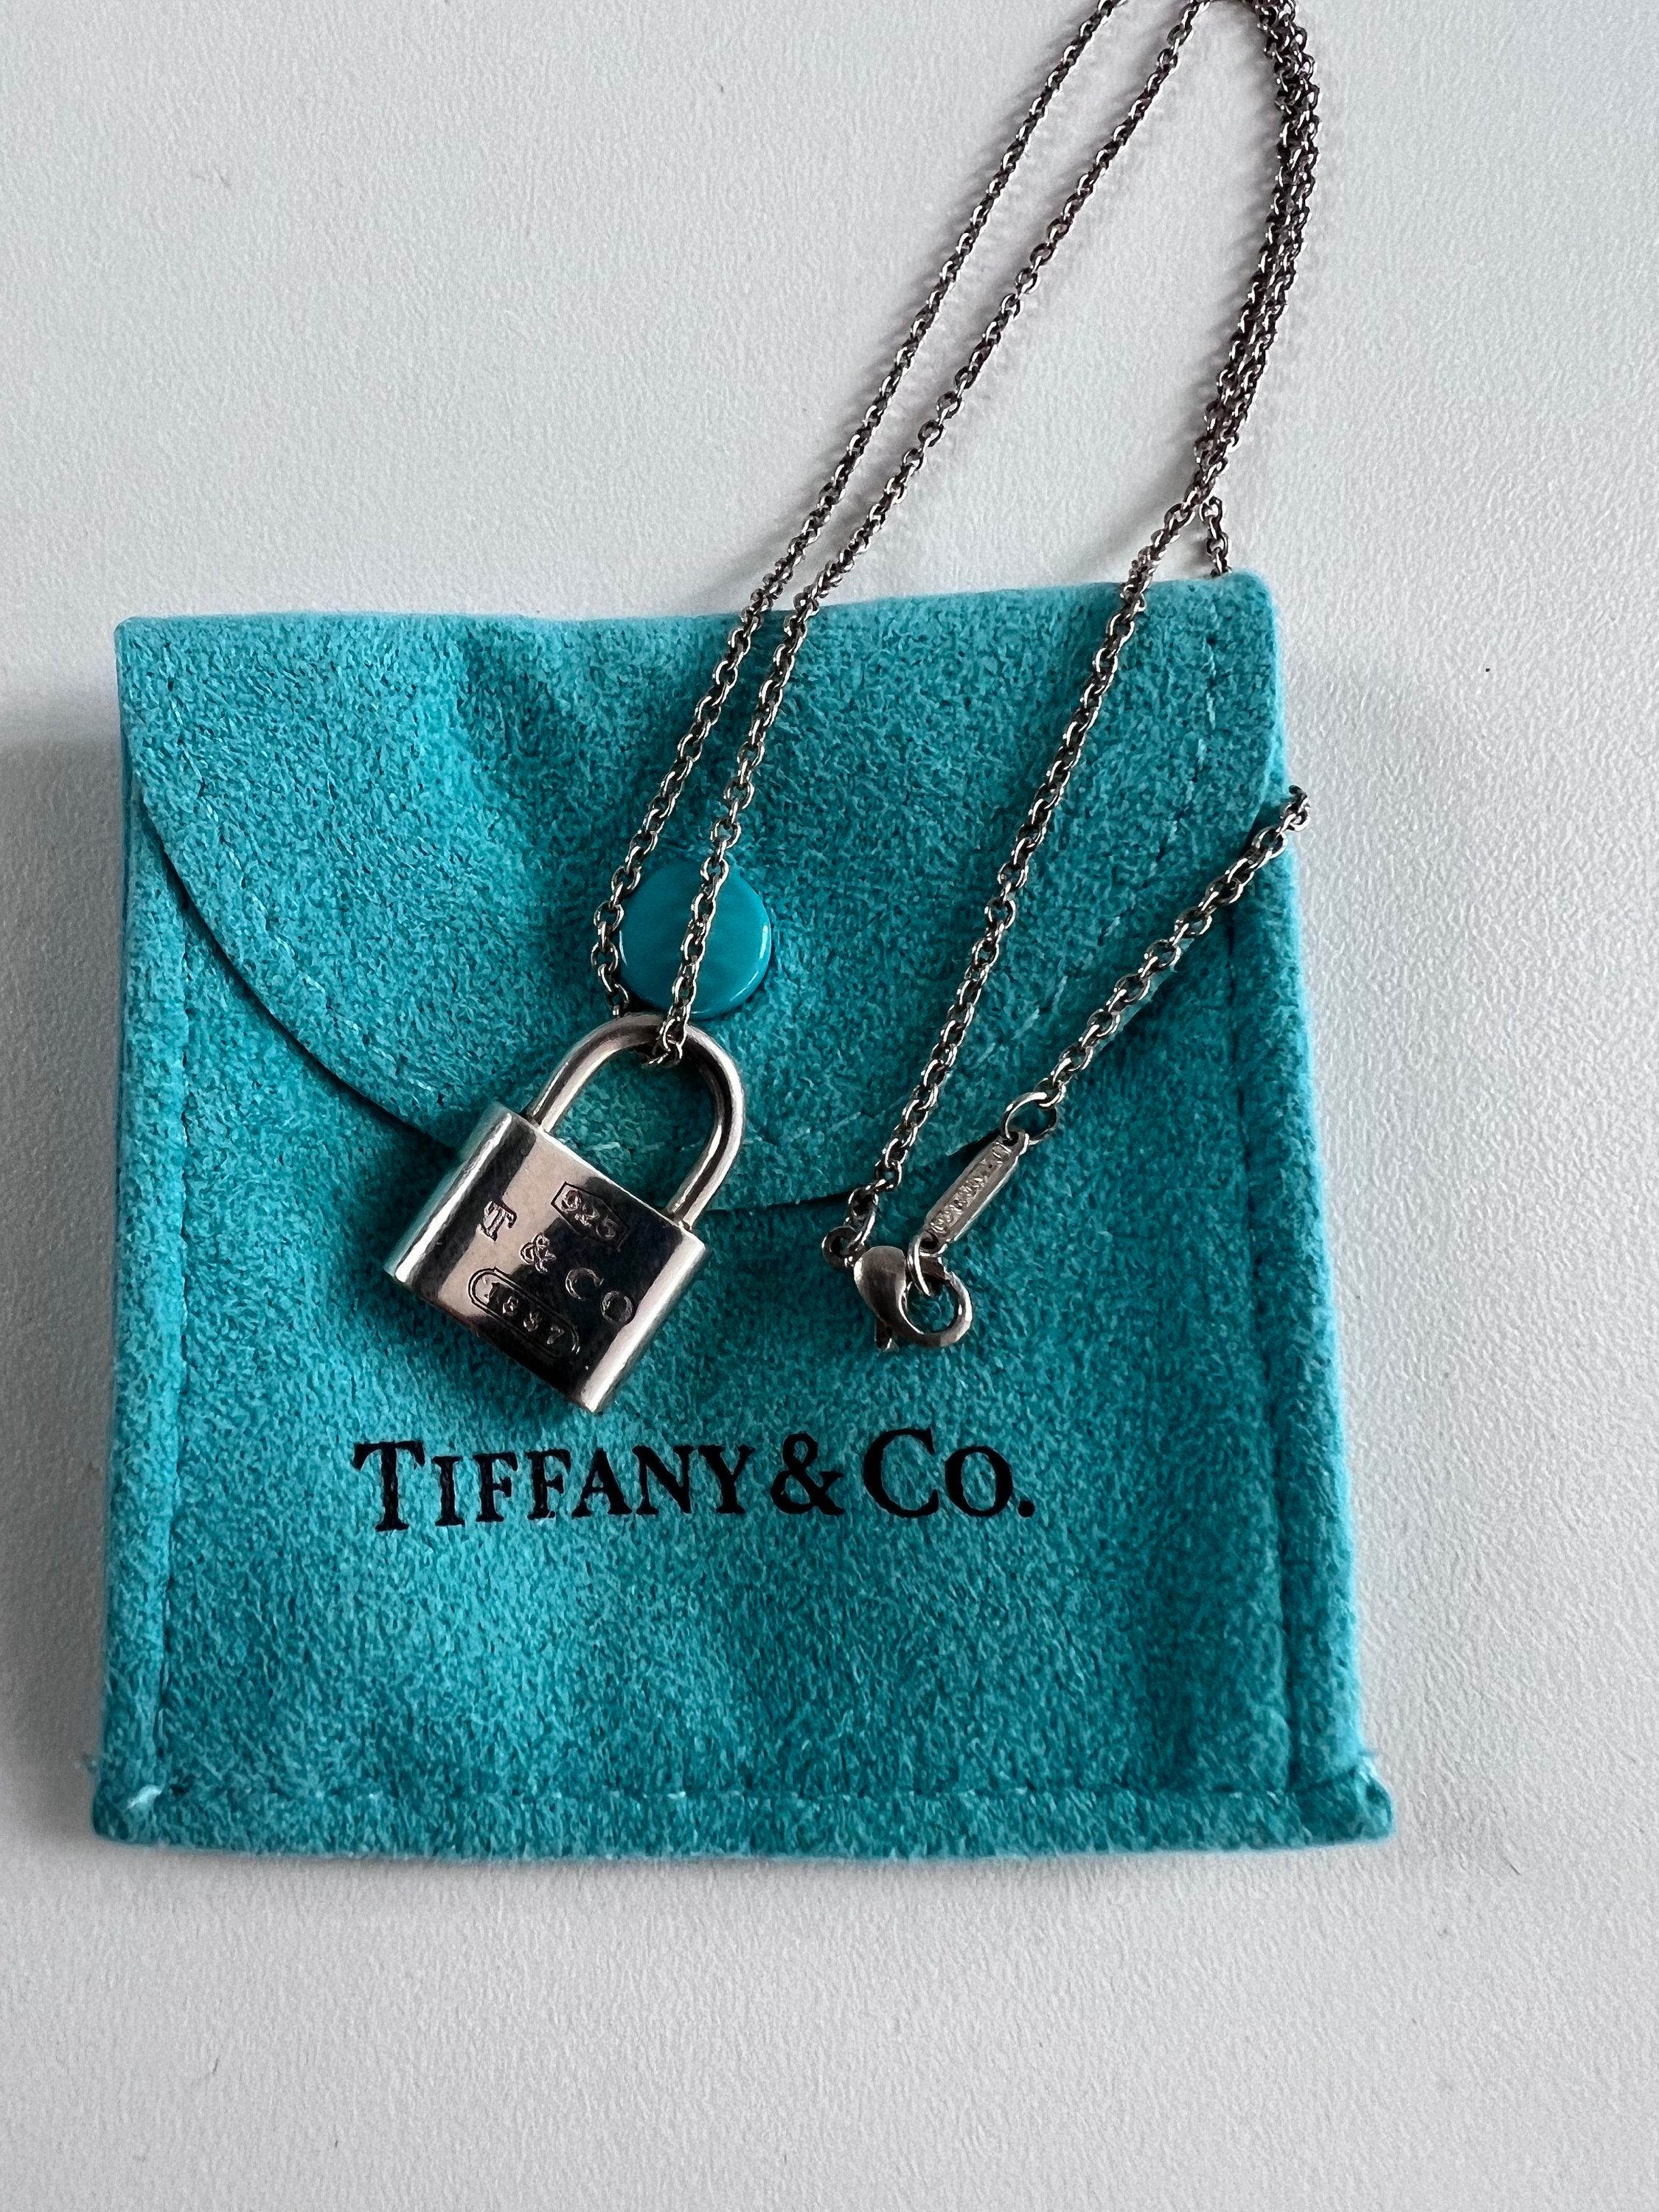 Tiffany & Co. 1837 Lock Charm Pendant Necklace - Sterling Silver